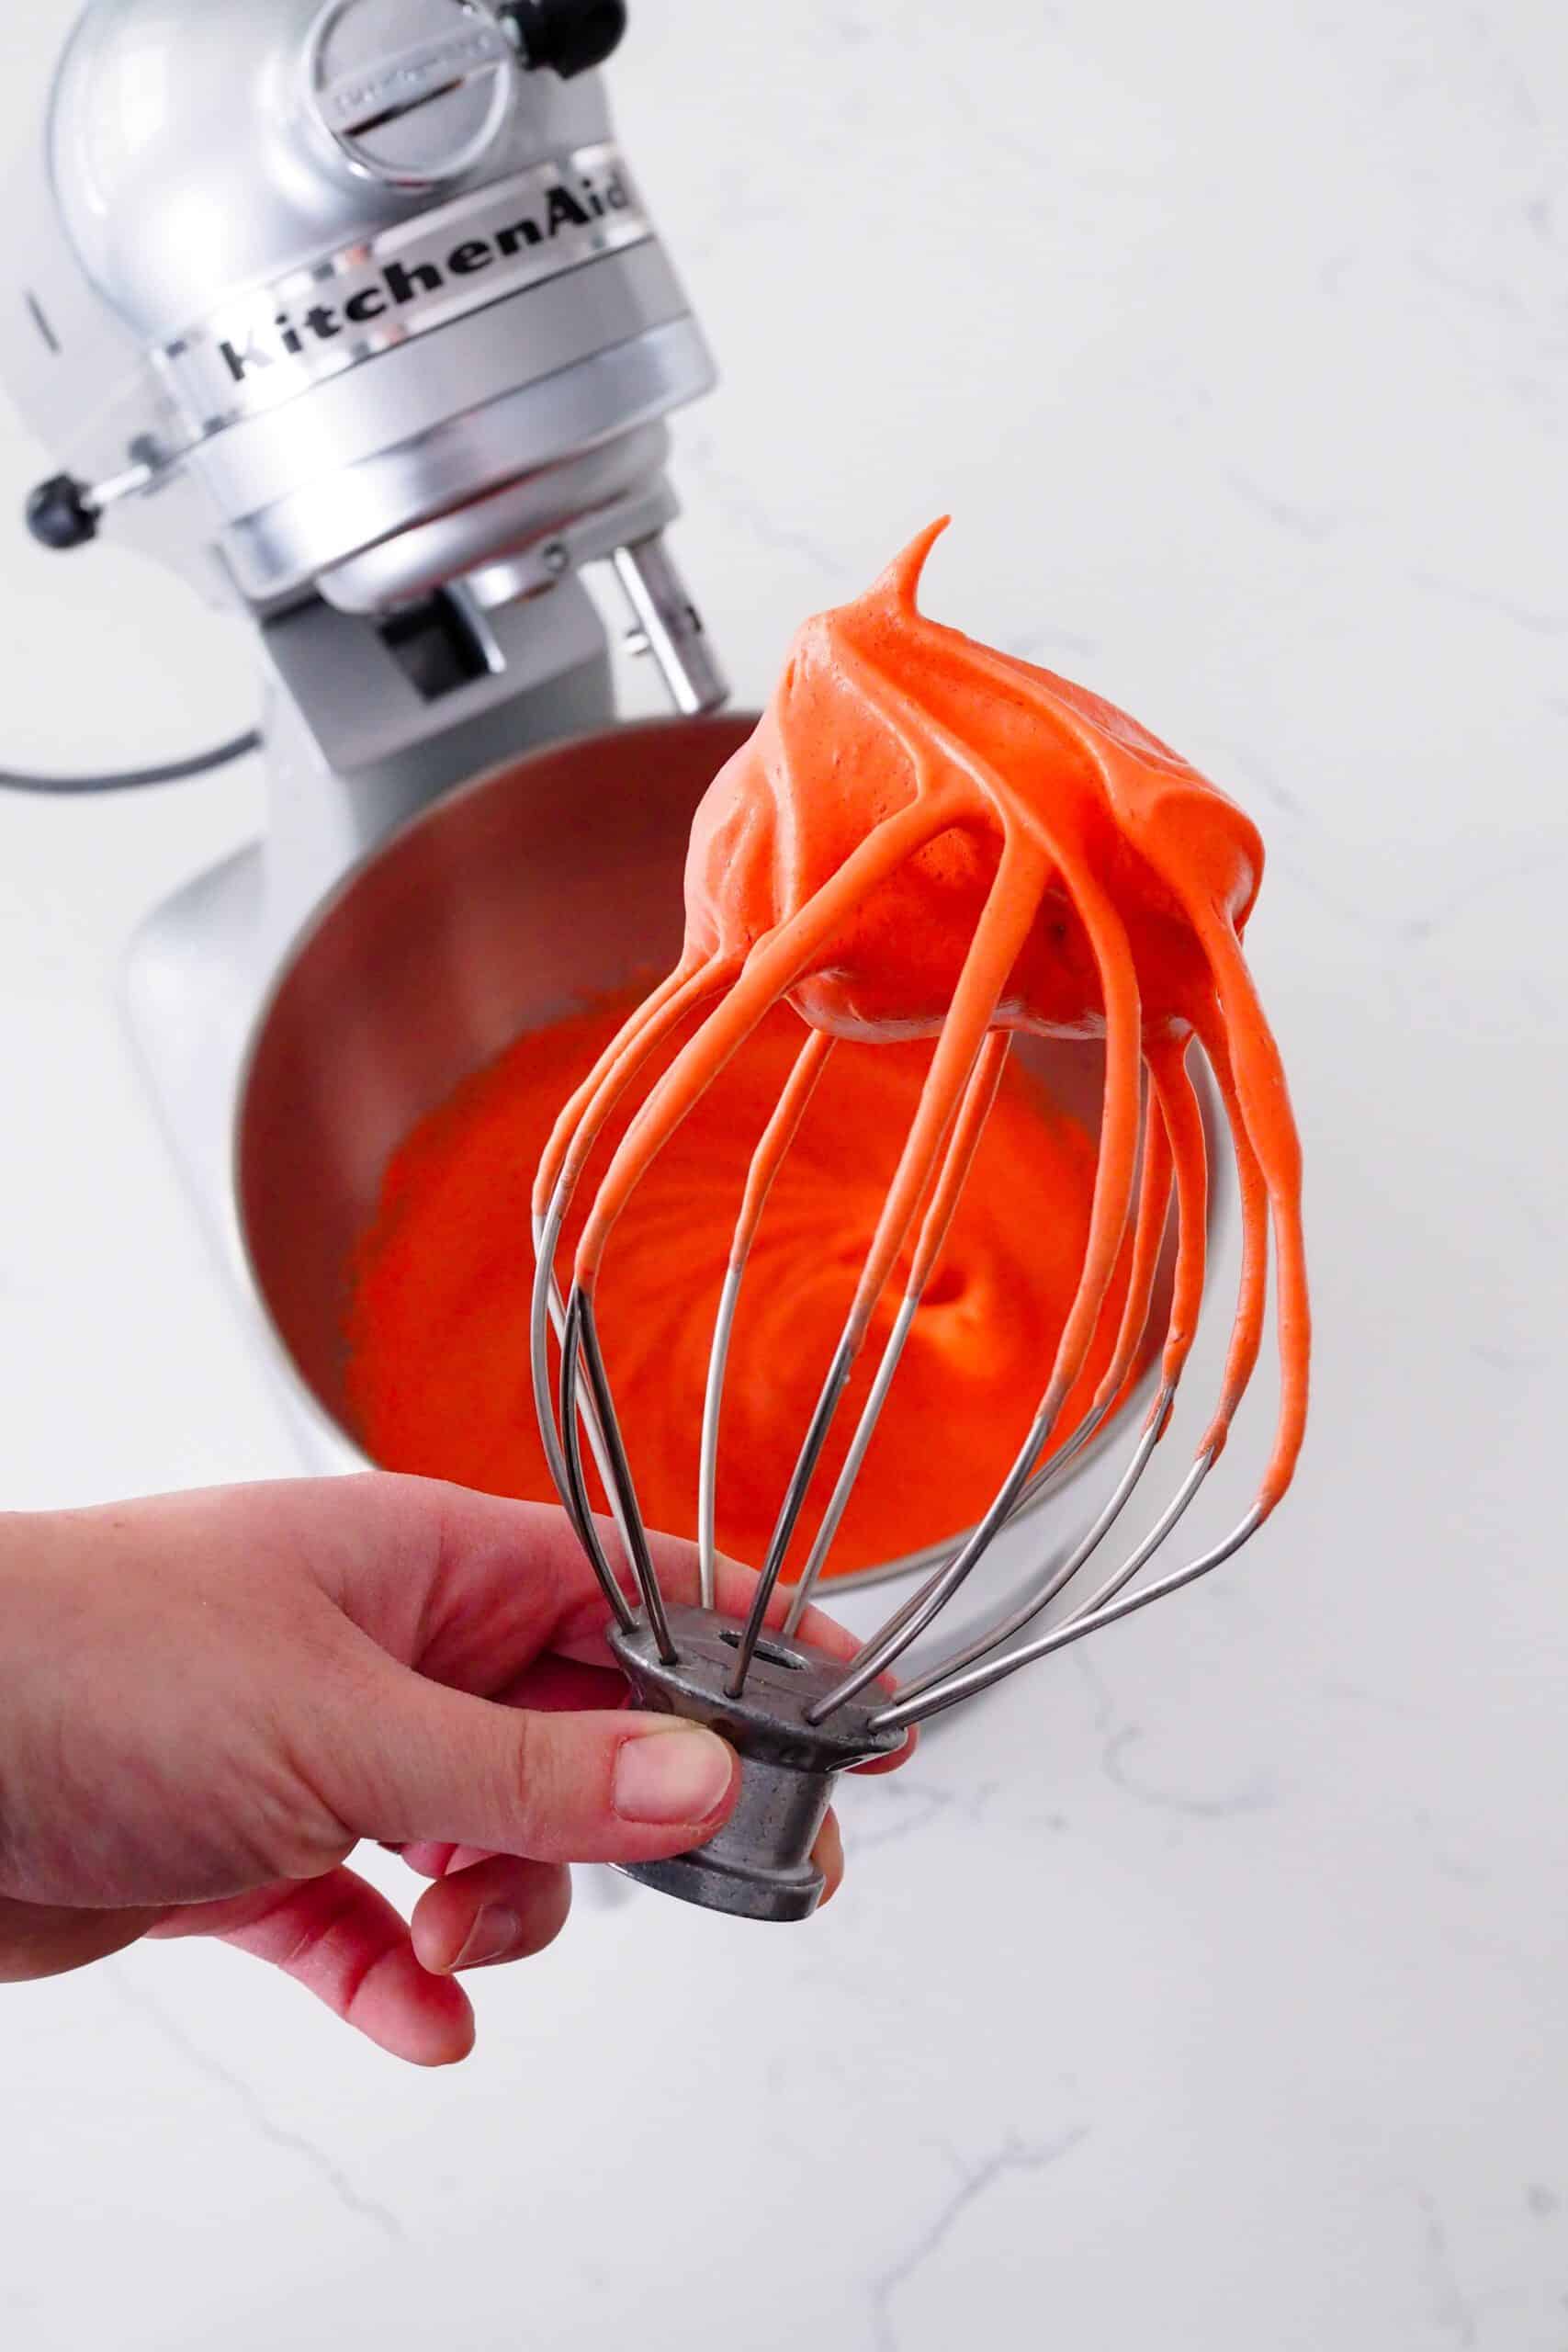 A clump of red meringue with stiff peaks on a KitchenAid whisk attachment.